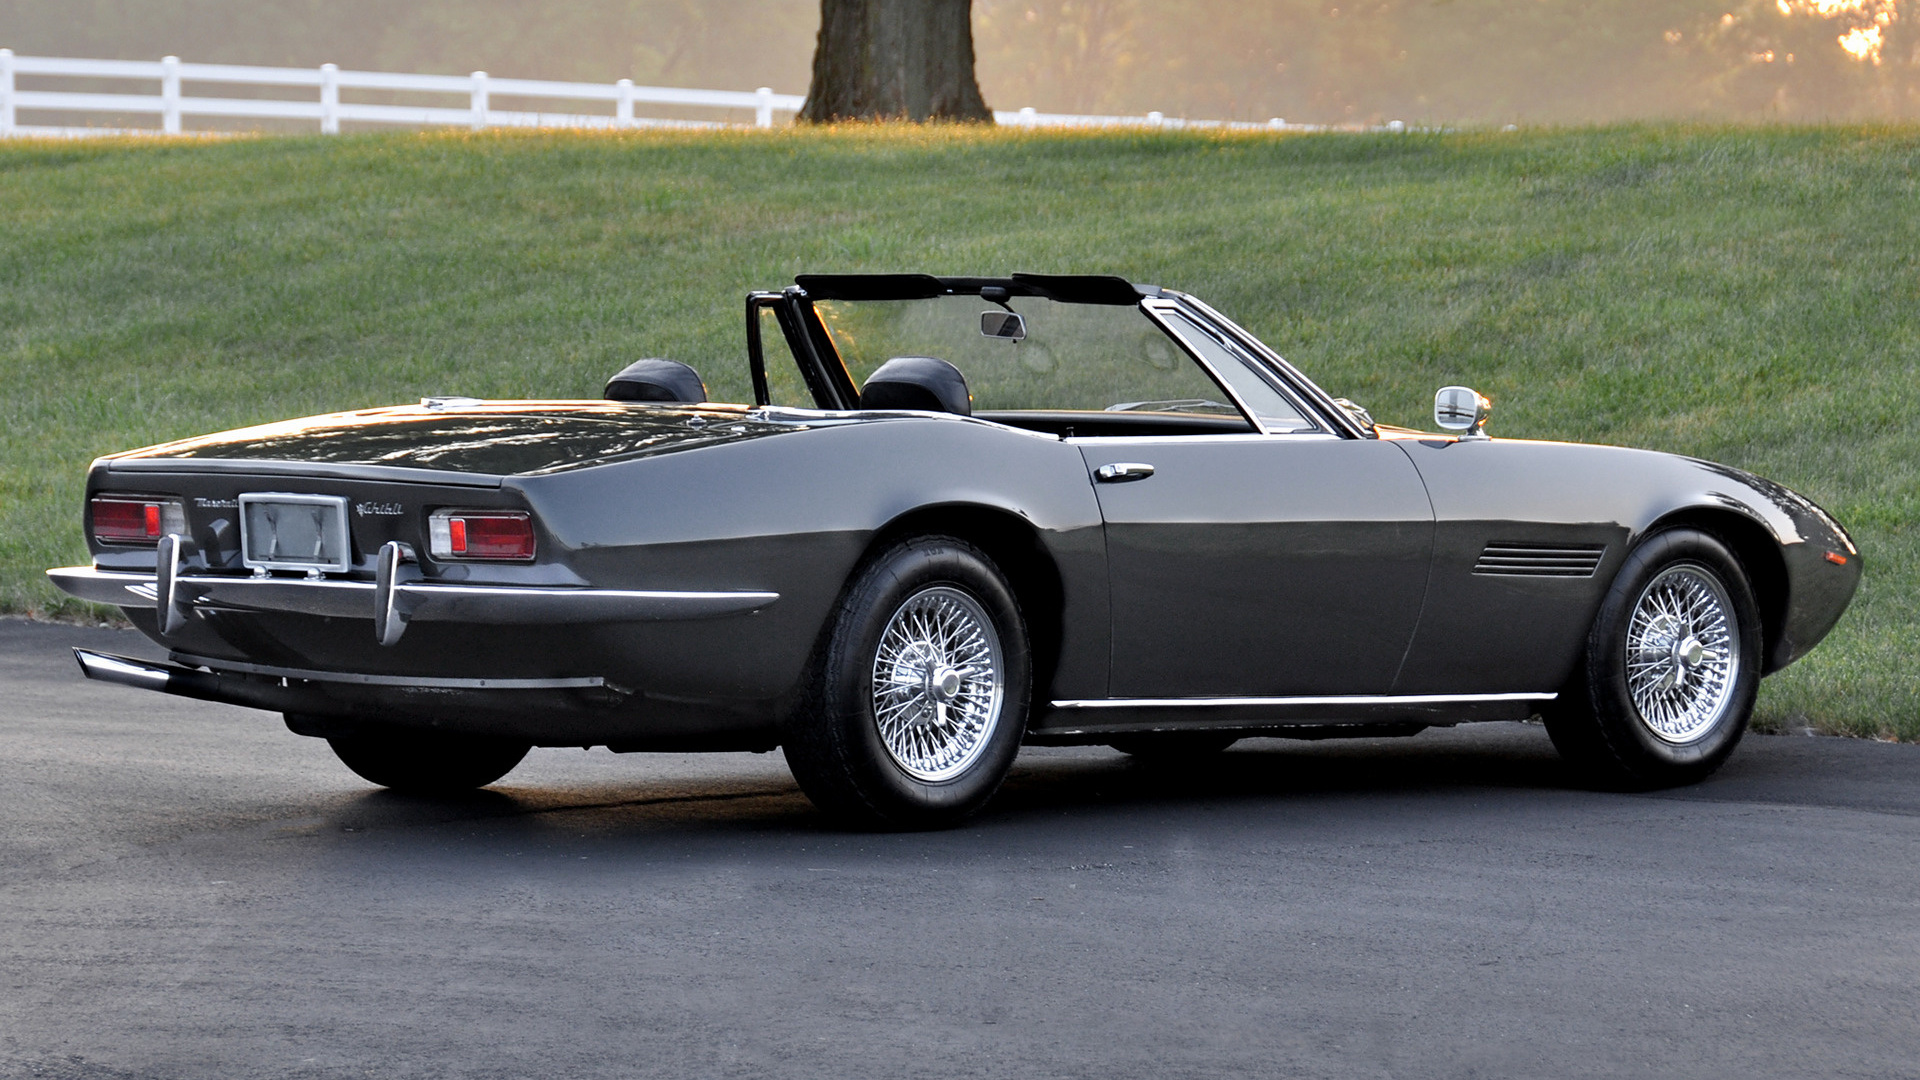 1969 Maserati Ghibli Spyder Wallpapers And Hd Images Car Pixel